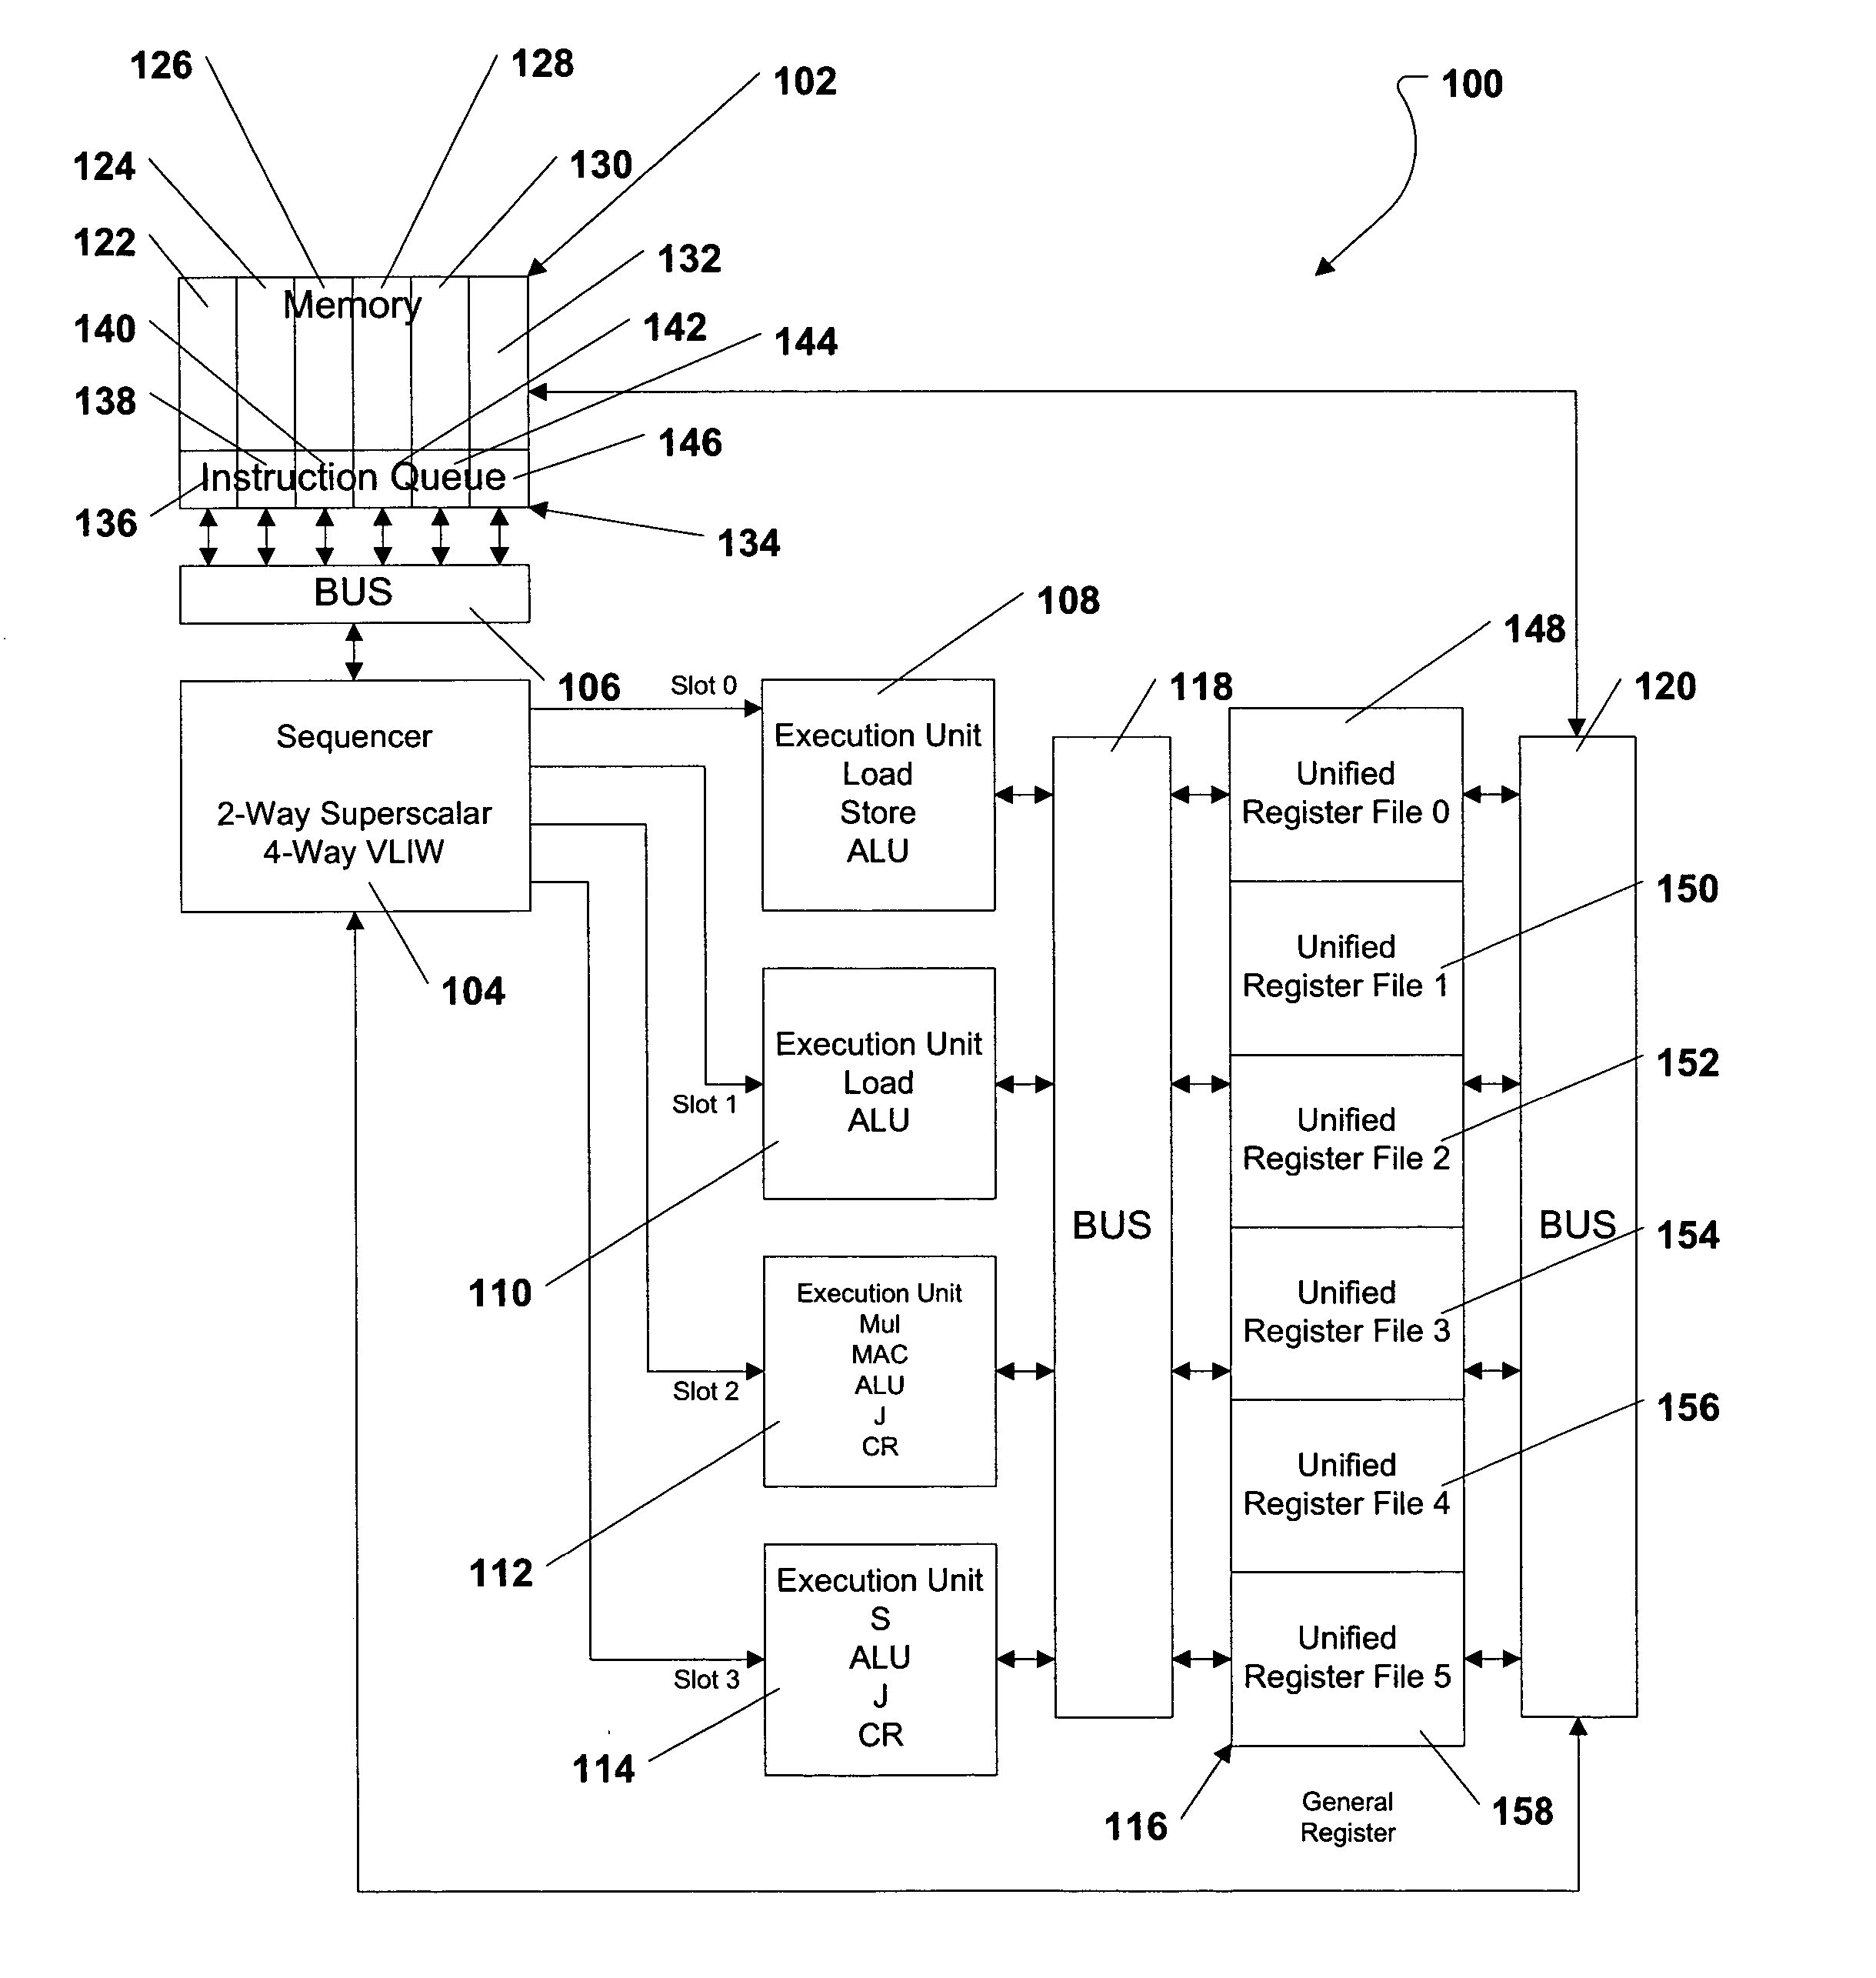 Unified non-partitioned register files for a digital signal processor operating in an interleaved multi-threaded environment